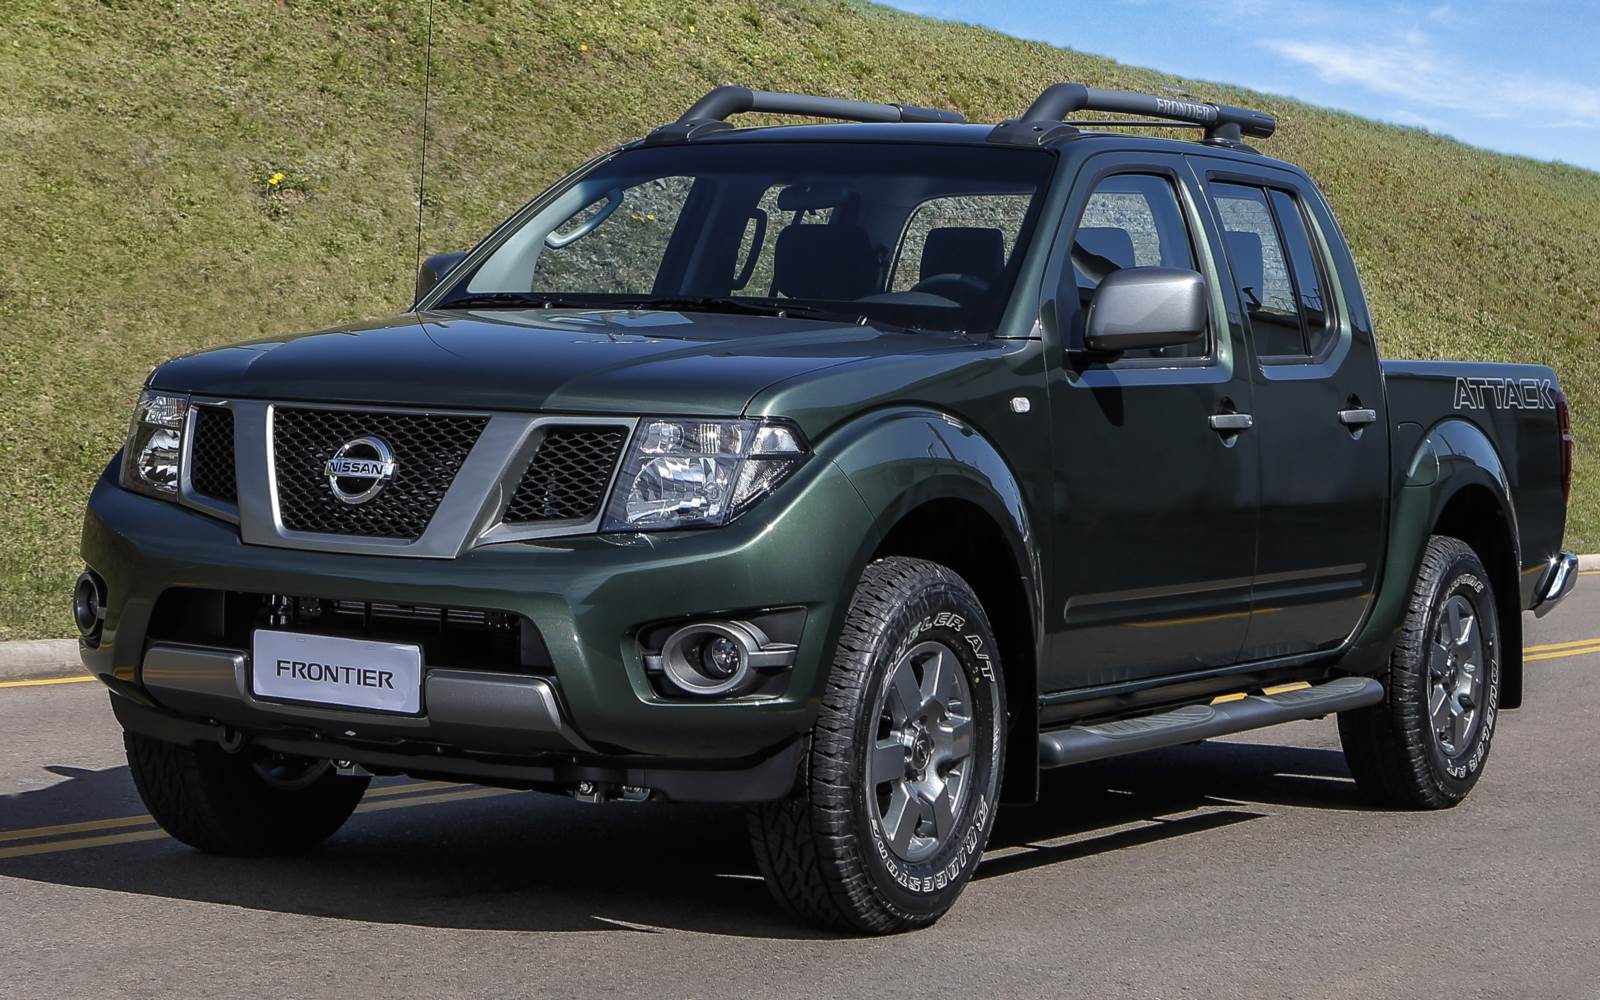 Nissan Frontier SV Attack 4x4